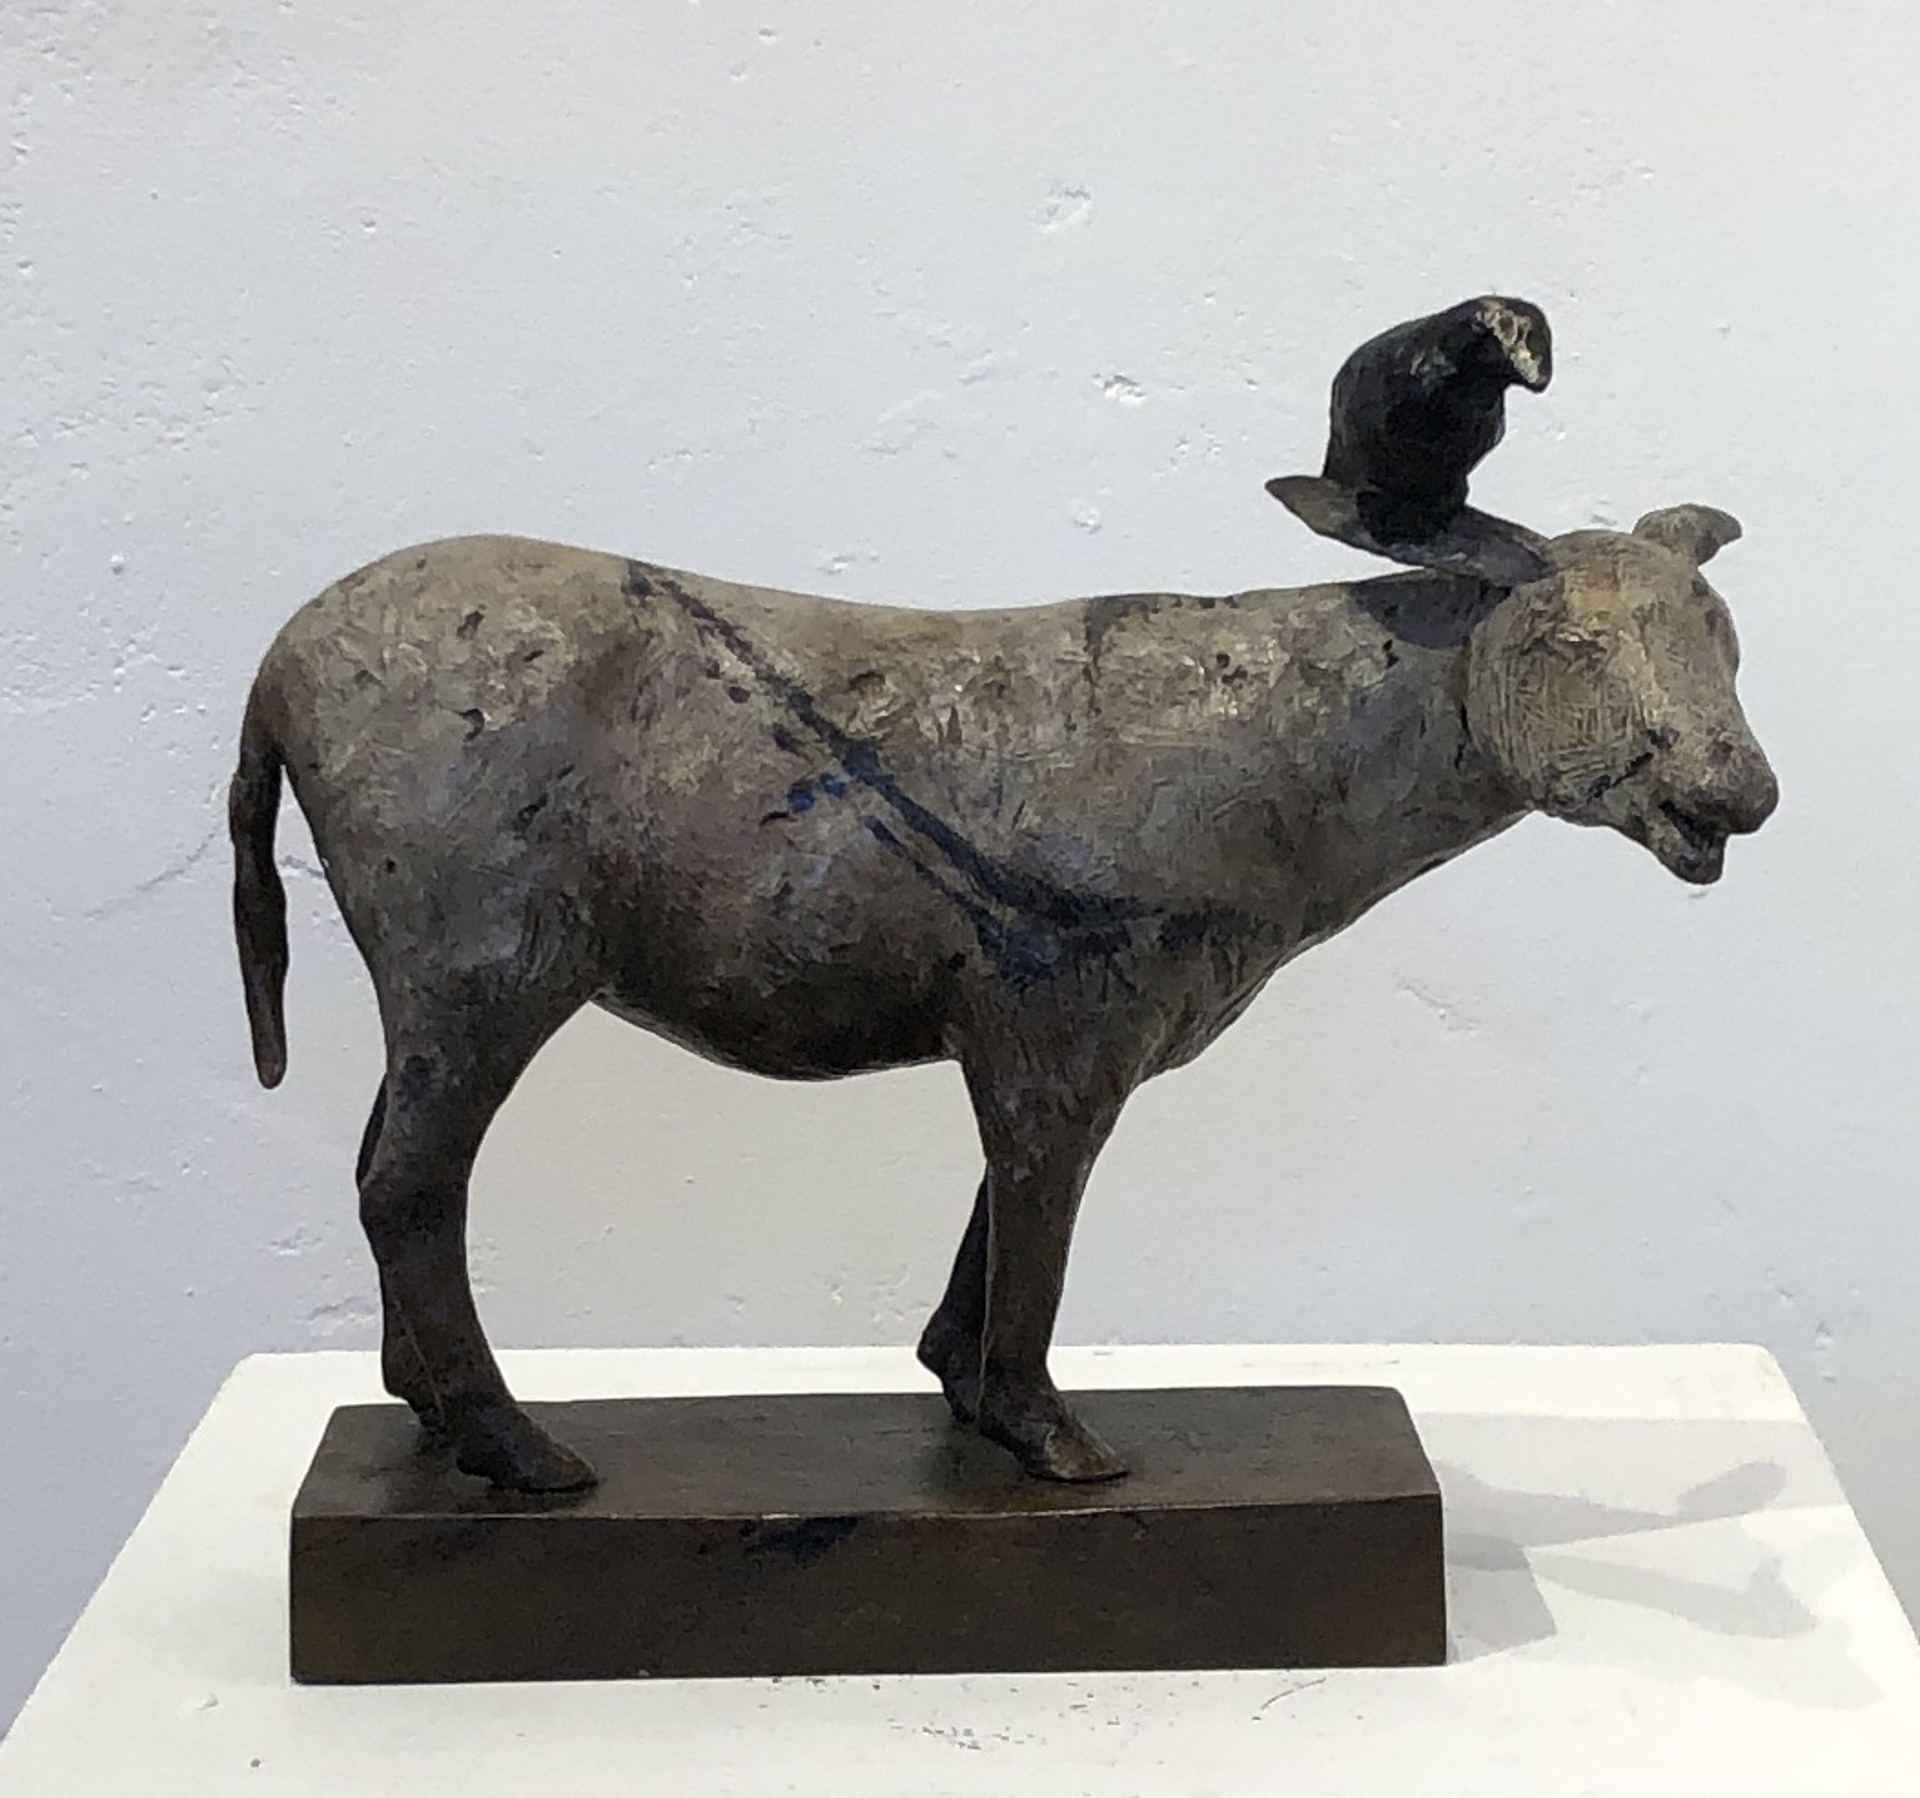 Burro with Crow by Copper Tritscheller